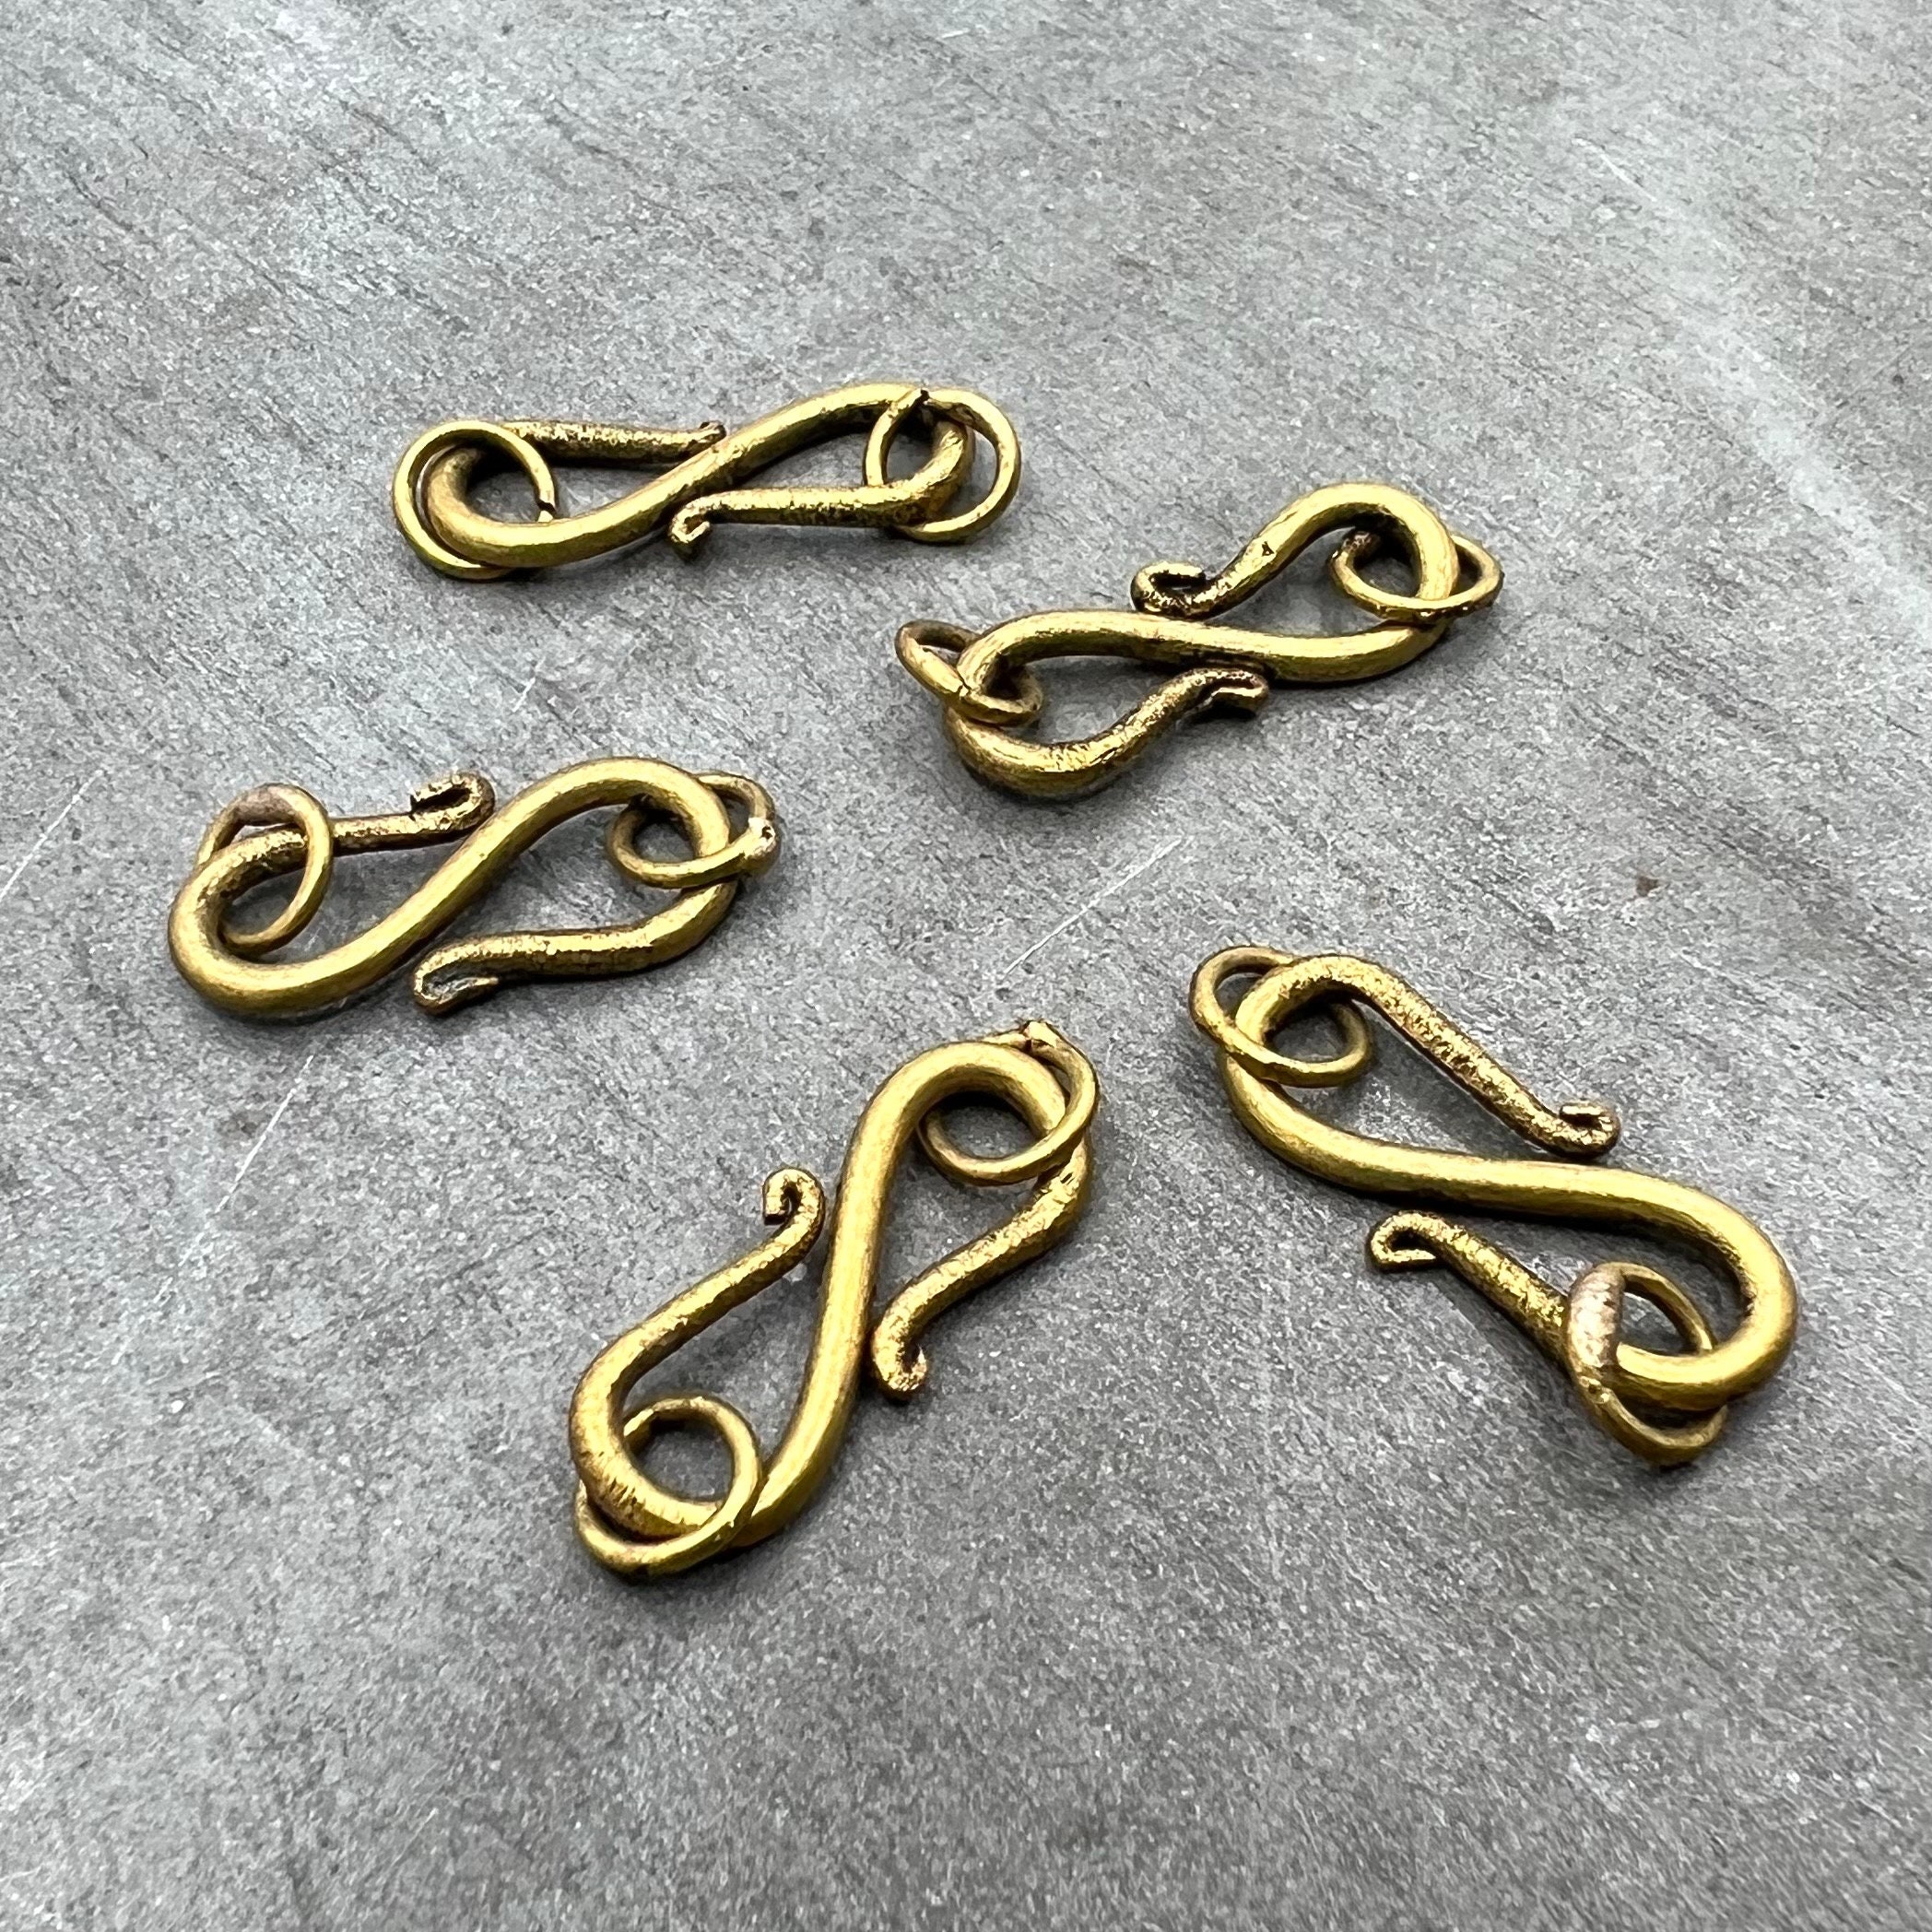 Hook and Eye Clasps, Jewelry Findings